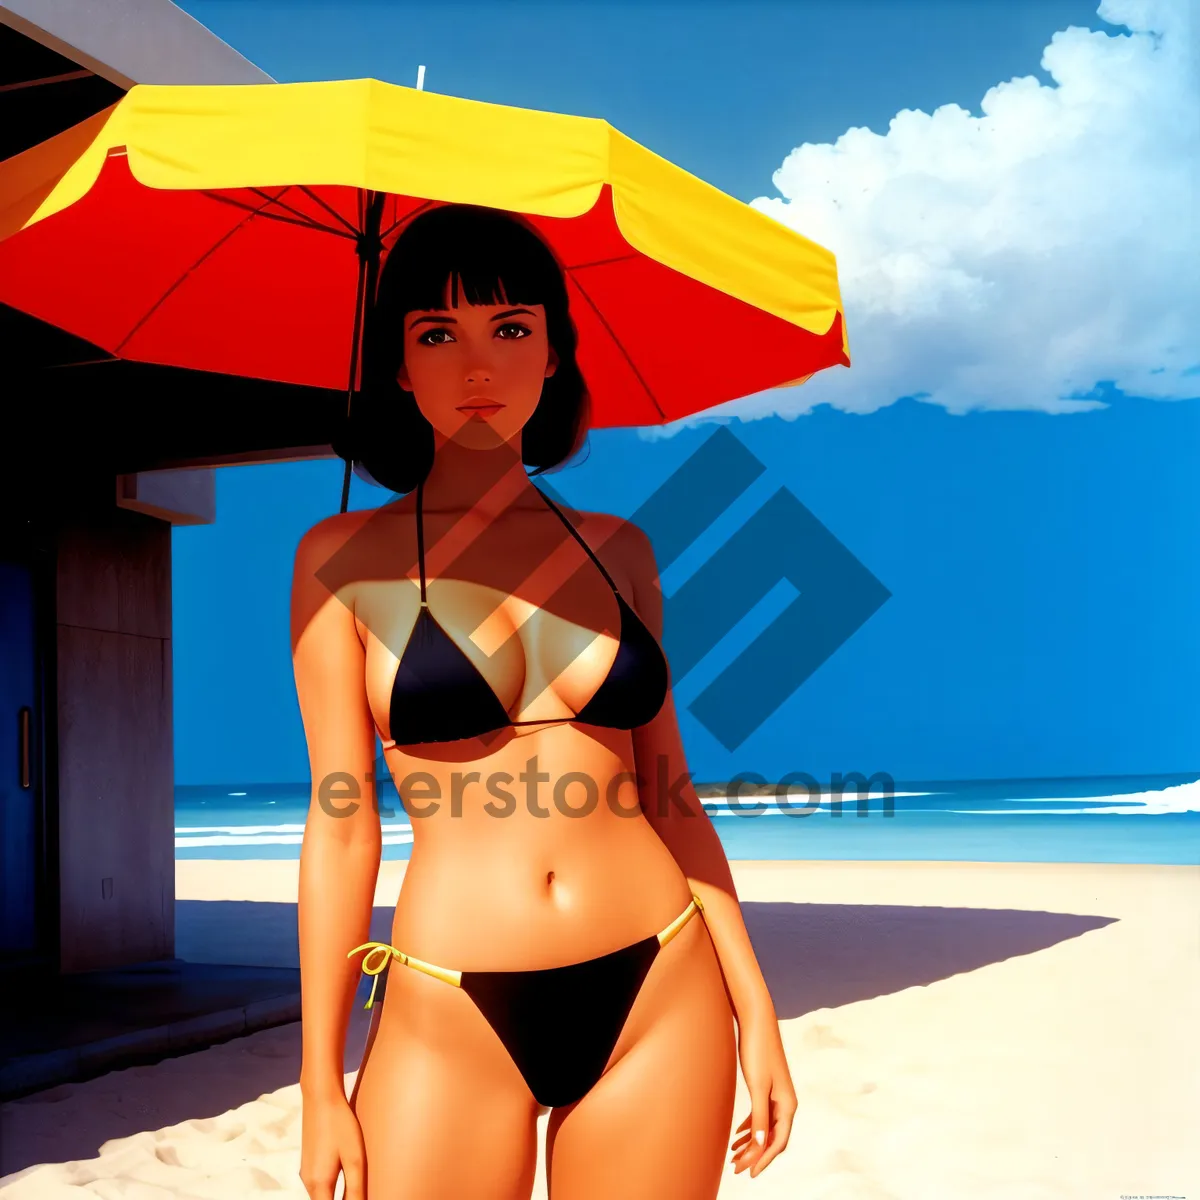 Picture of Sultry Beach Beauty in Stylish Bikini and Parasol